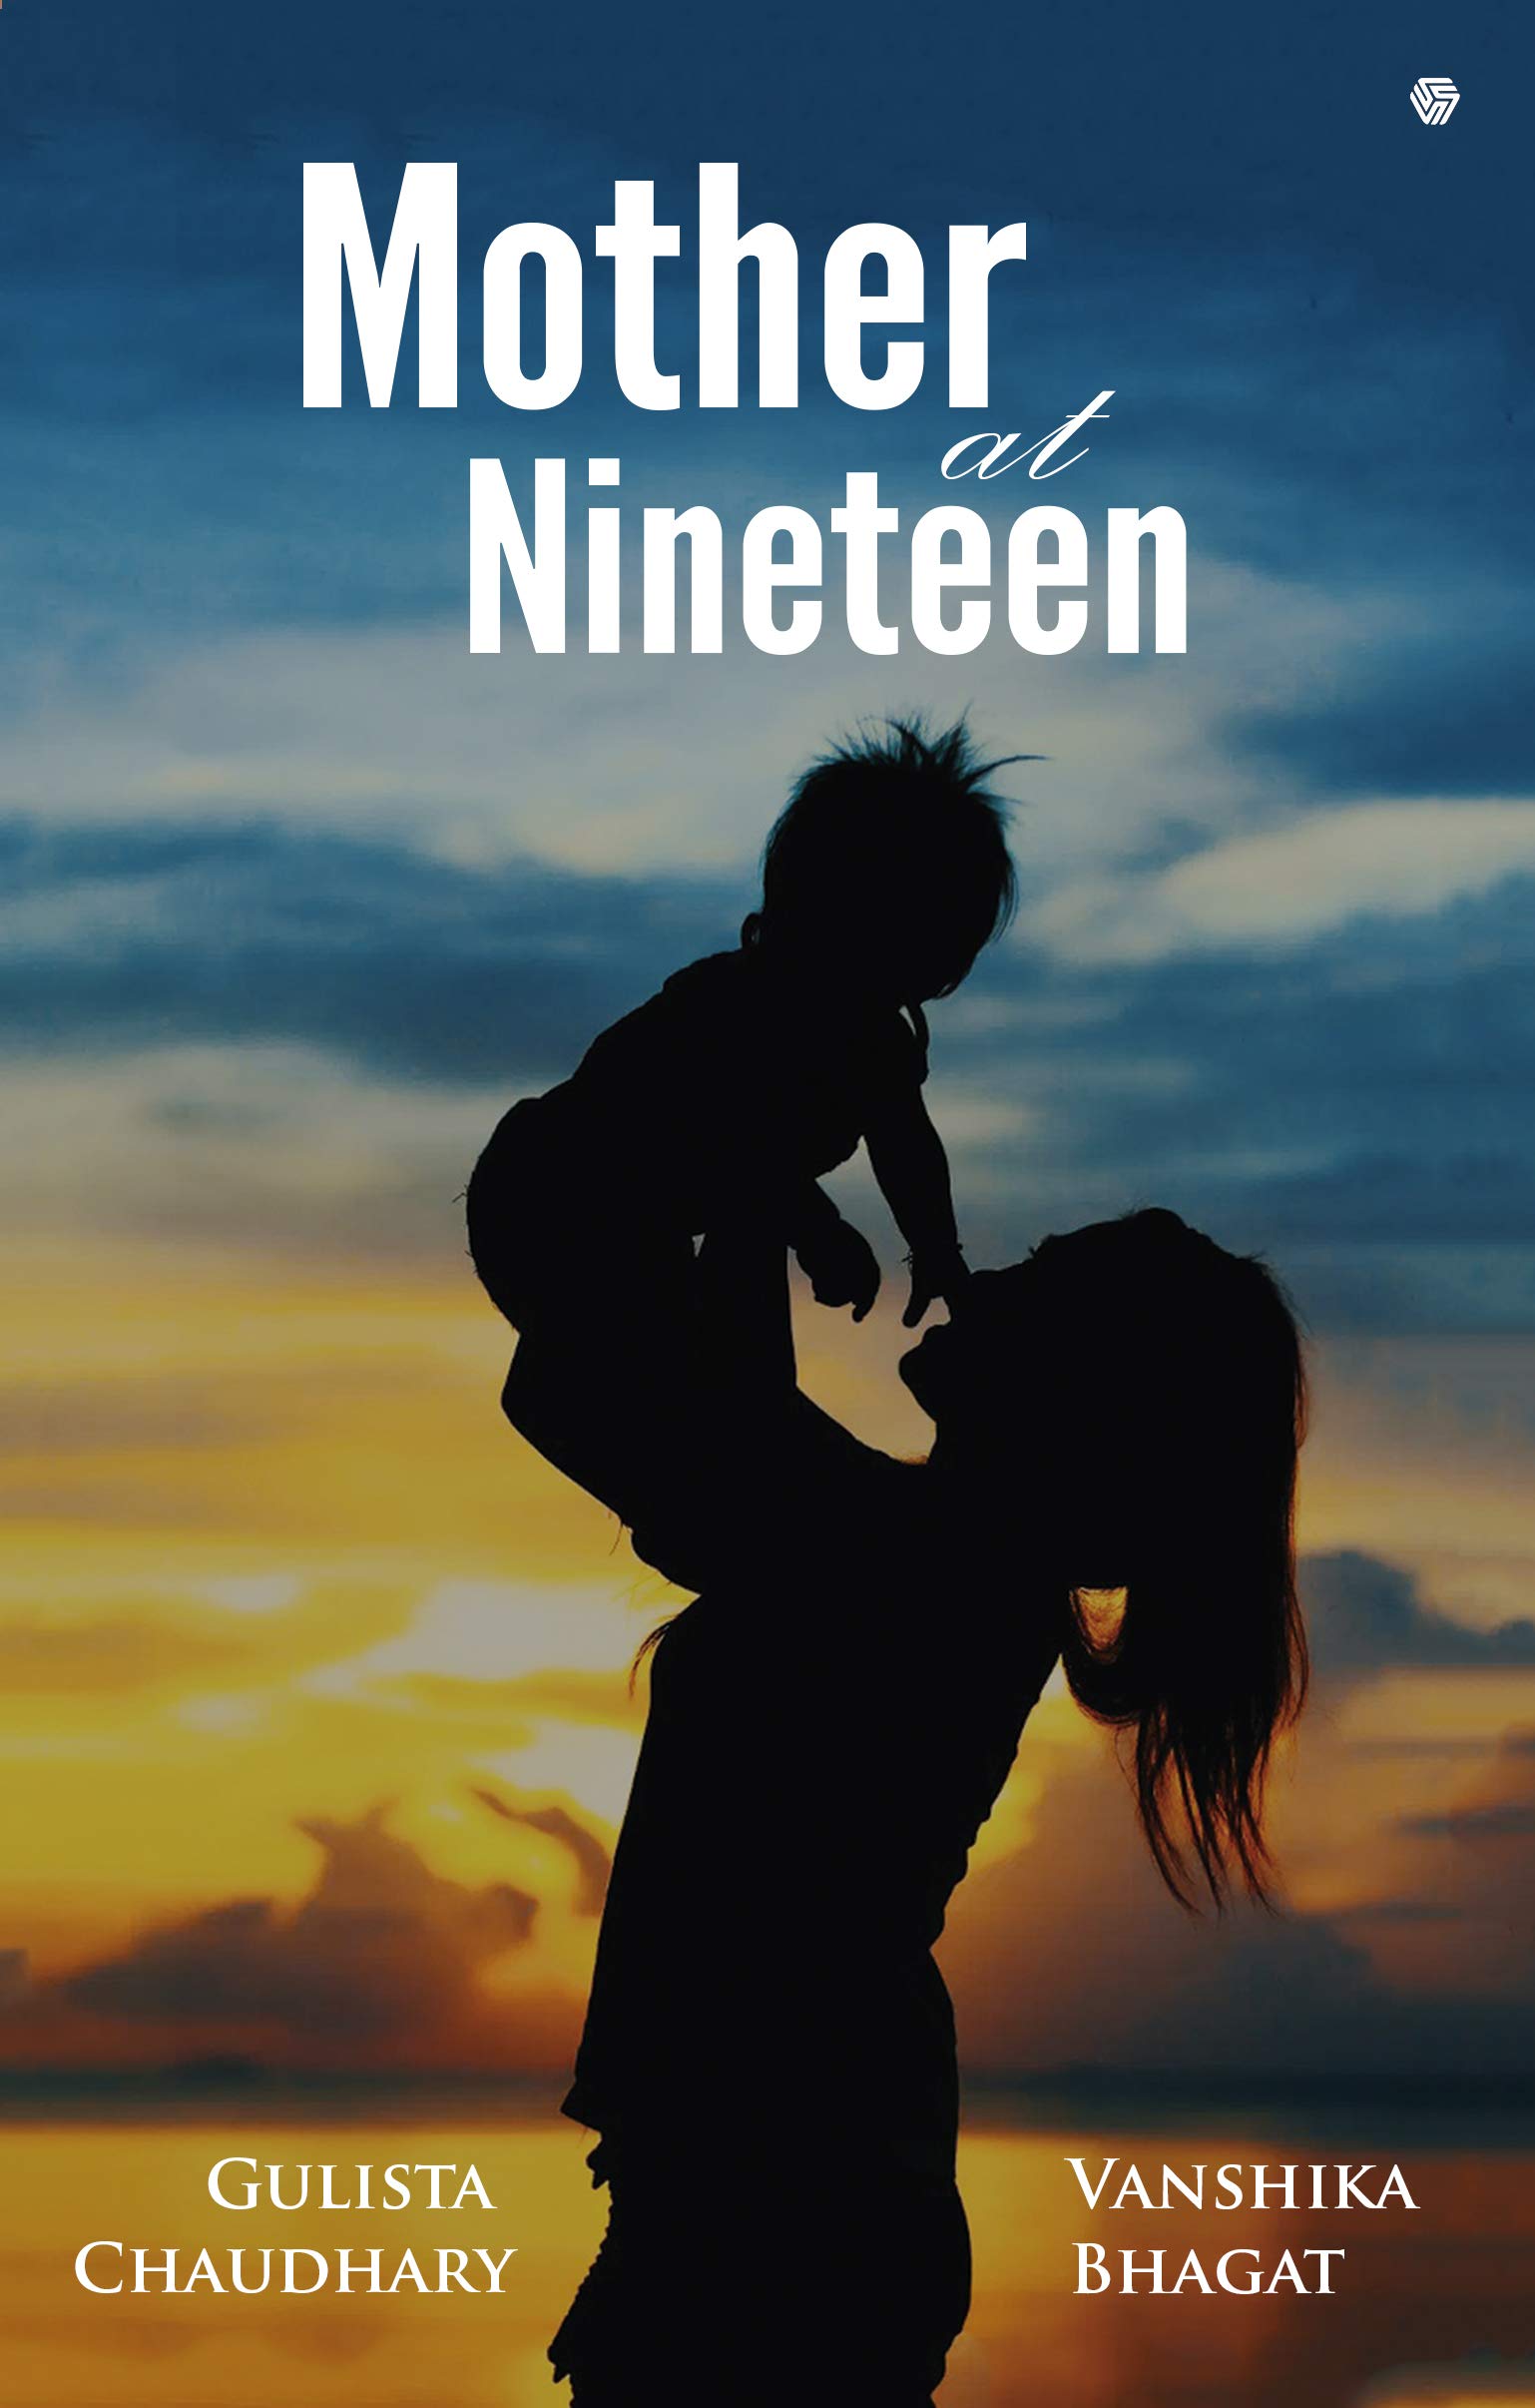  ‘Mother at Nineteen’ by Gulista Chaudhary